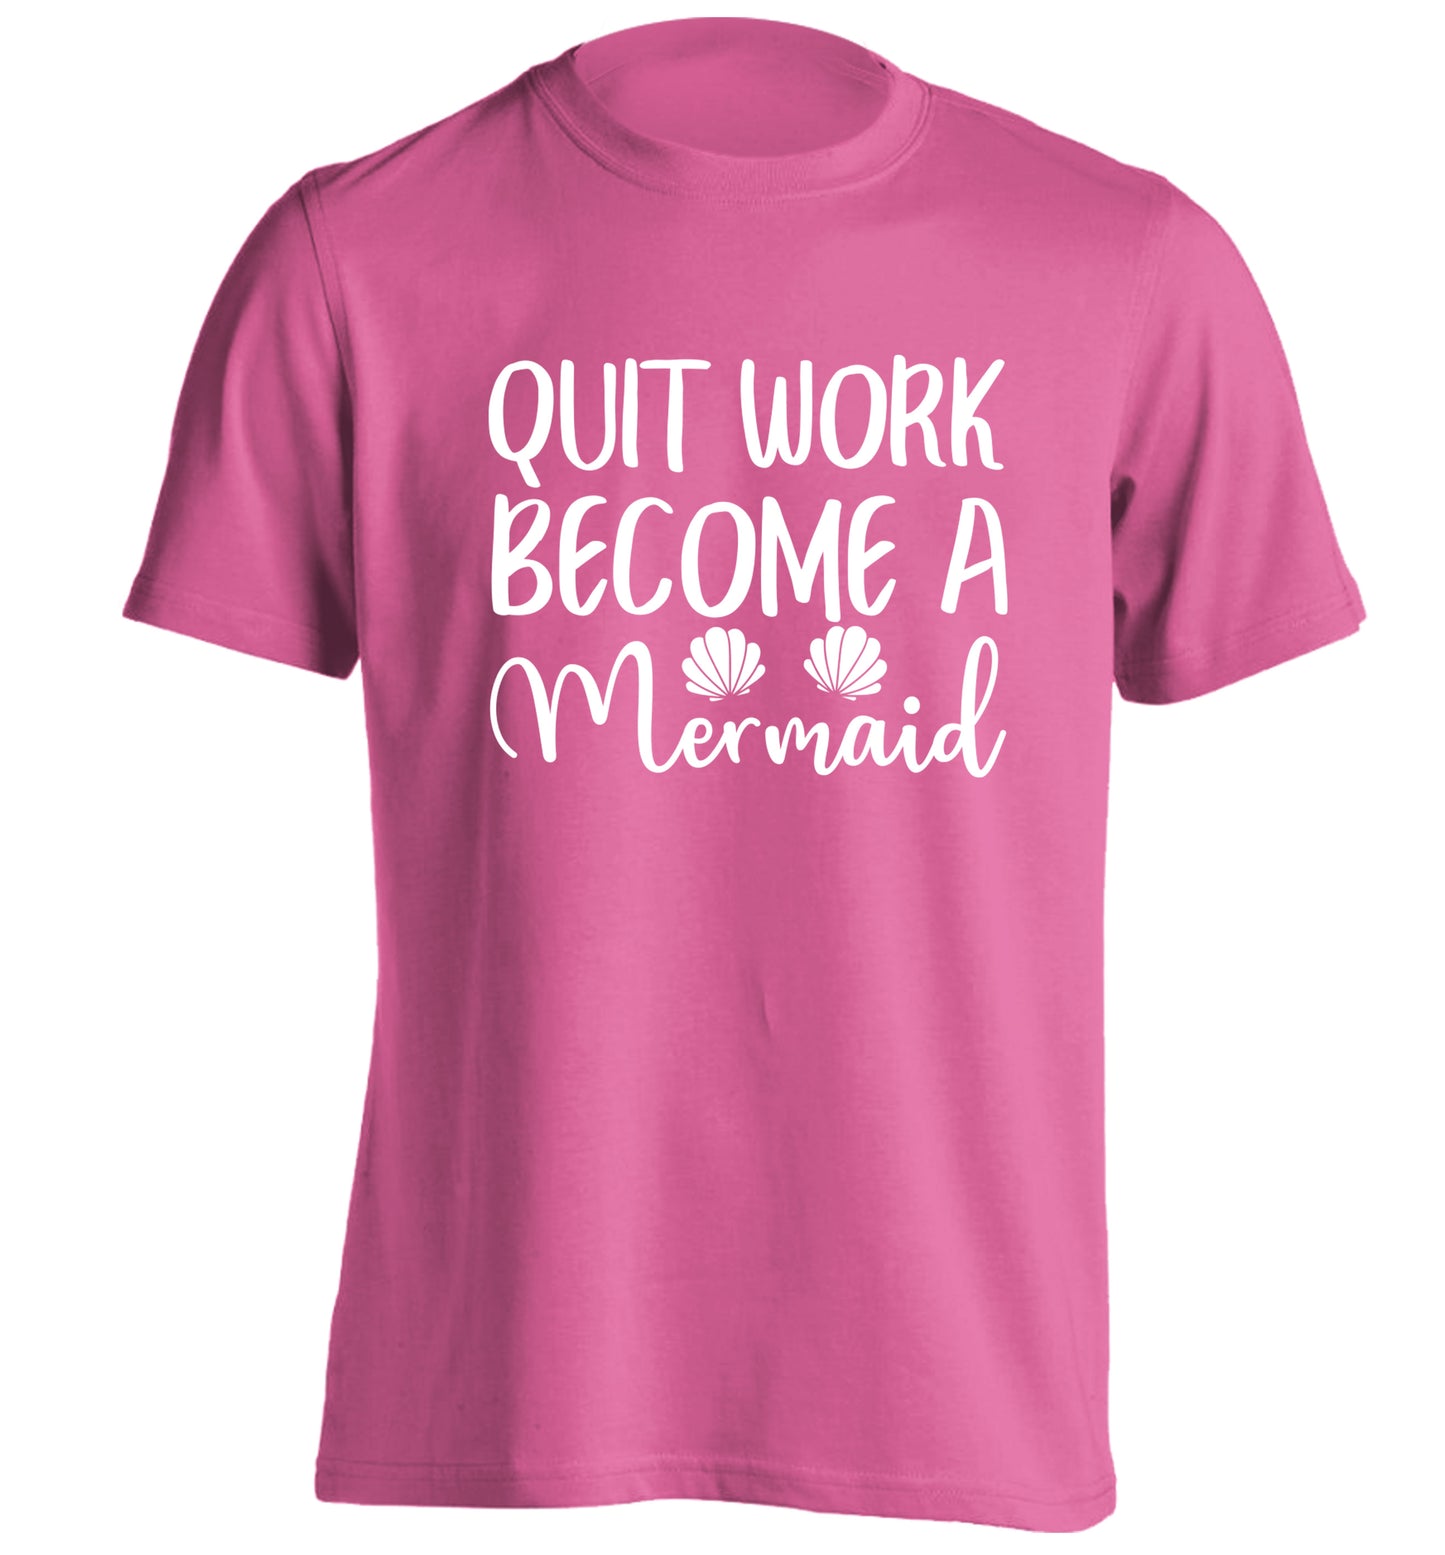 Quit work become a mermaid adults unisex pink Tshirt 2XL